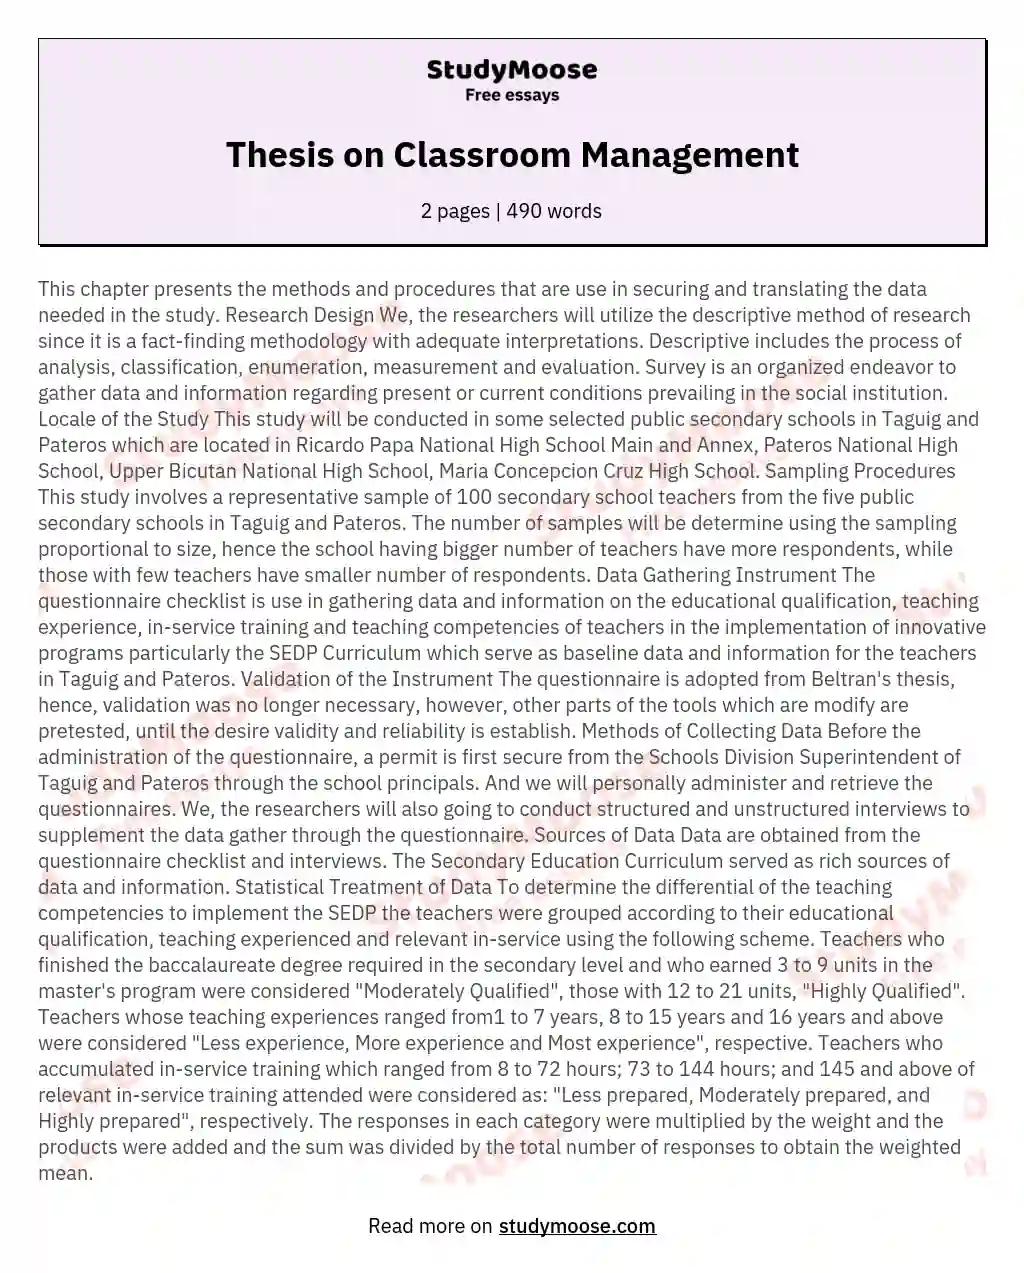 thesis about classroom management